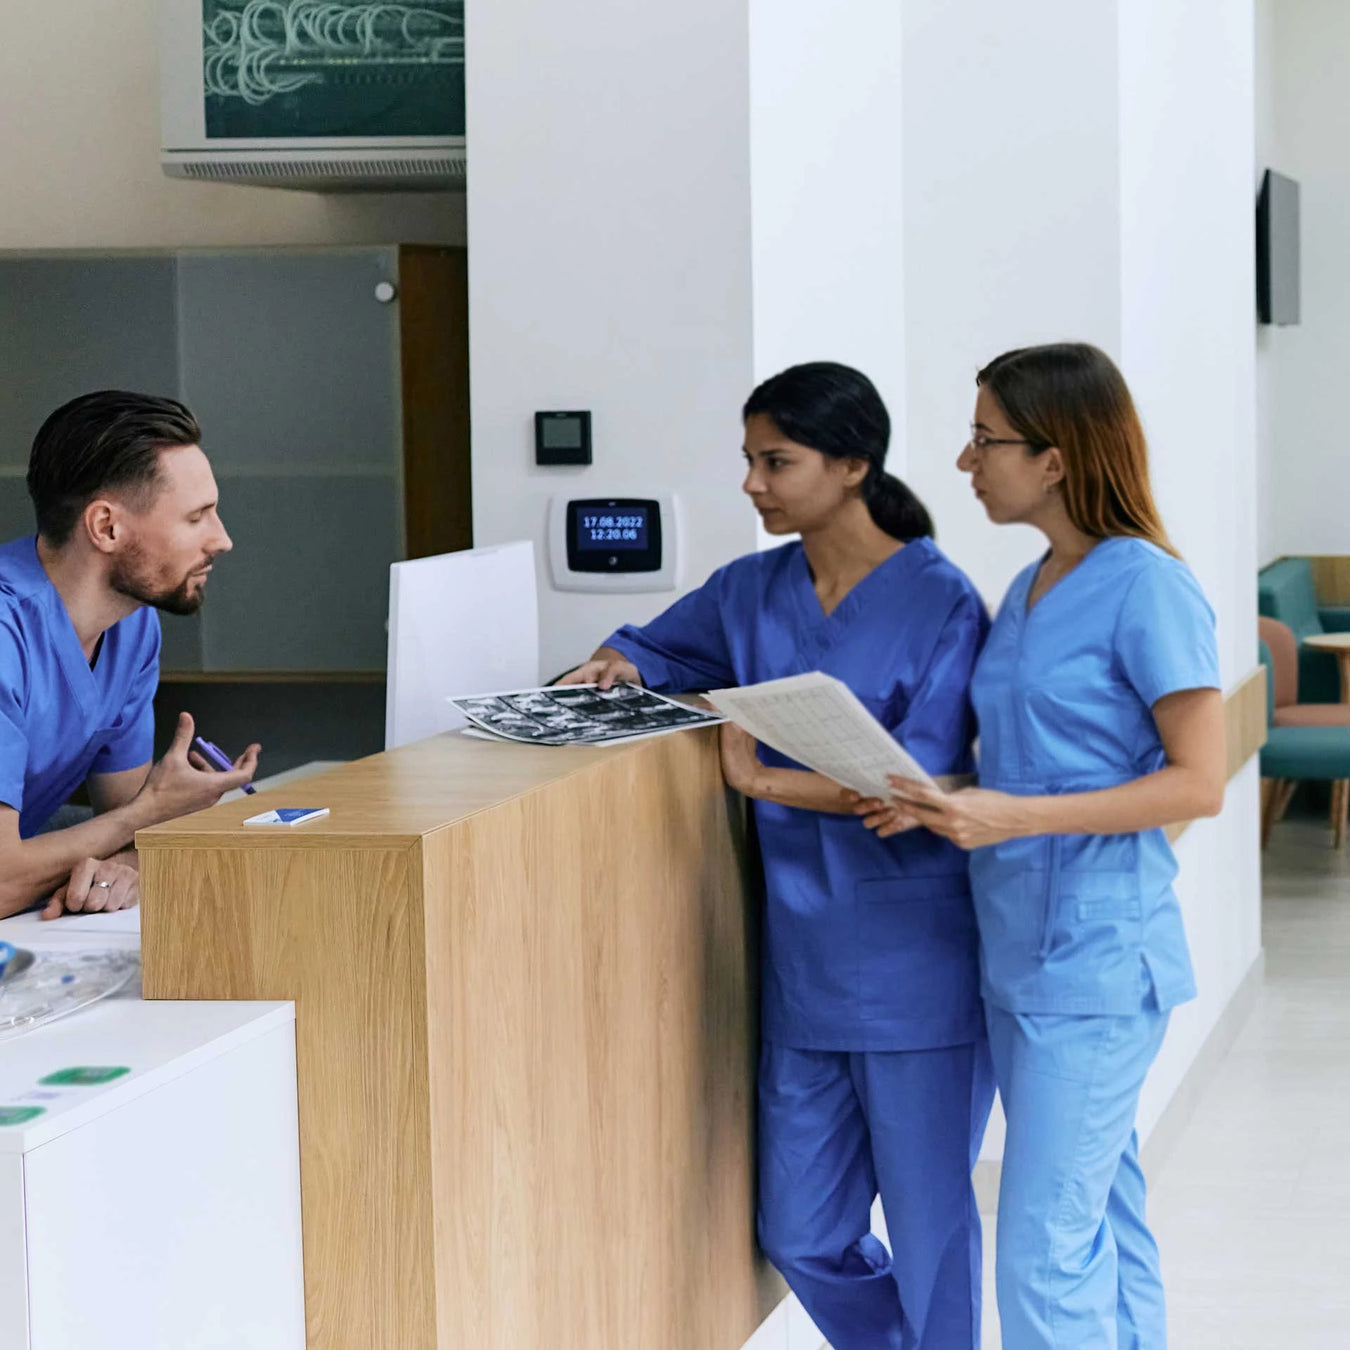 two doctors converse with an attending nurse over images